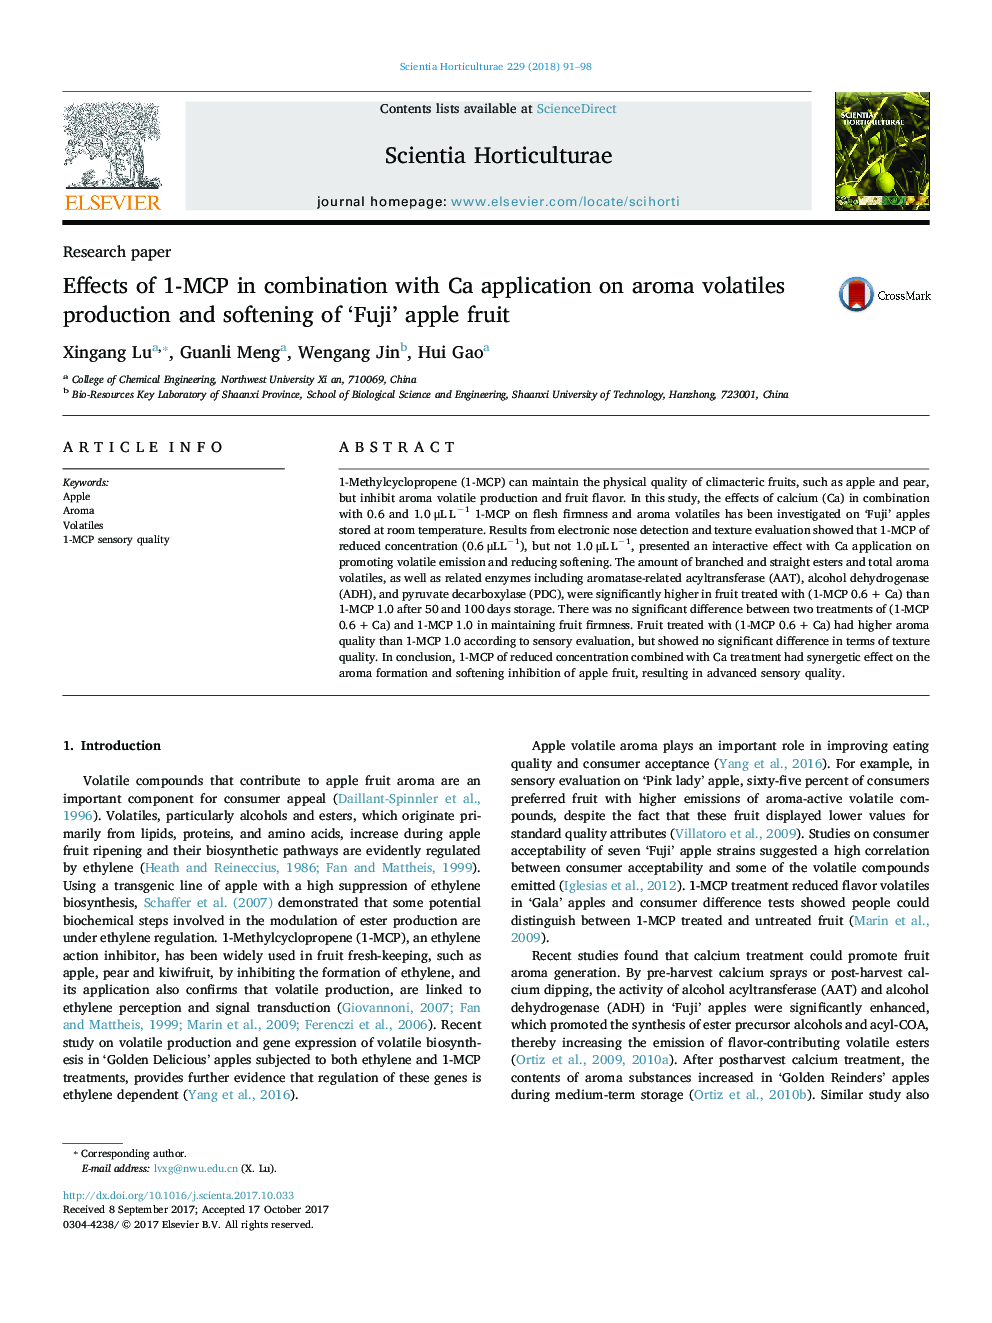 Effects of 1-MCP in combination with Ca application on aroma volatiles production and softening of 'Fuji' apple fruit